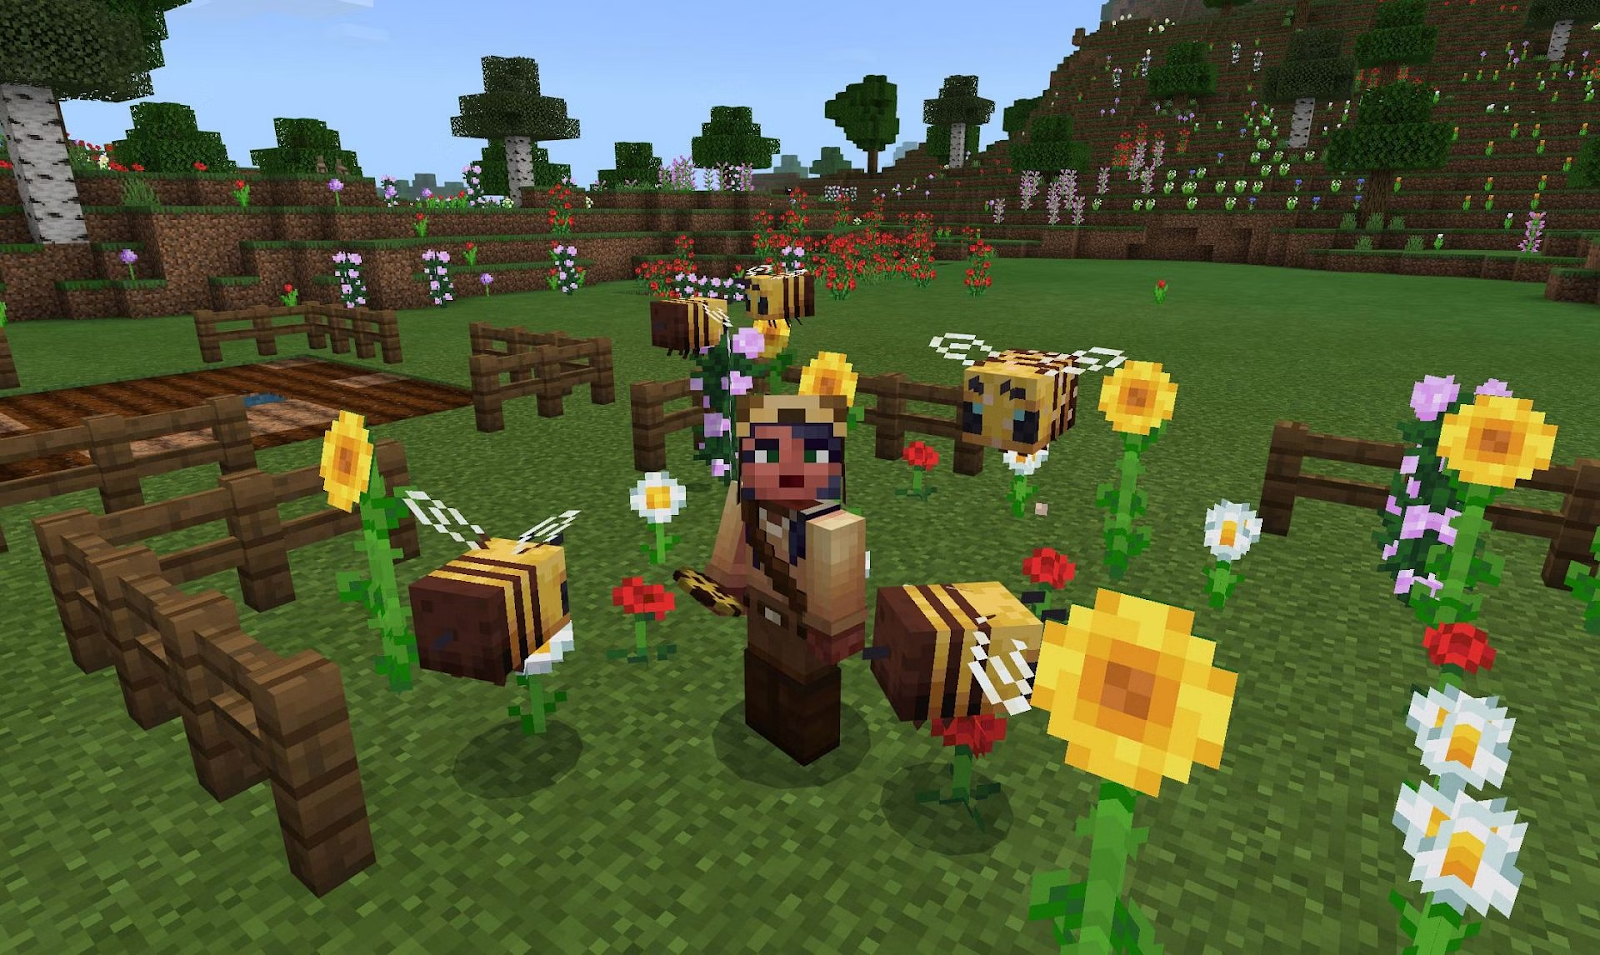 Finding a Flower for the Bees